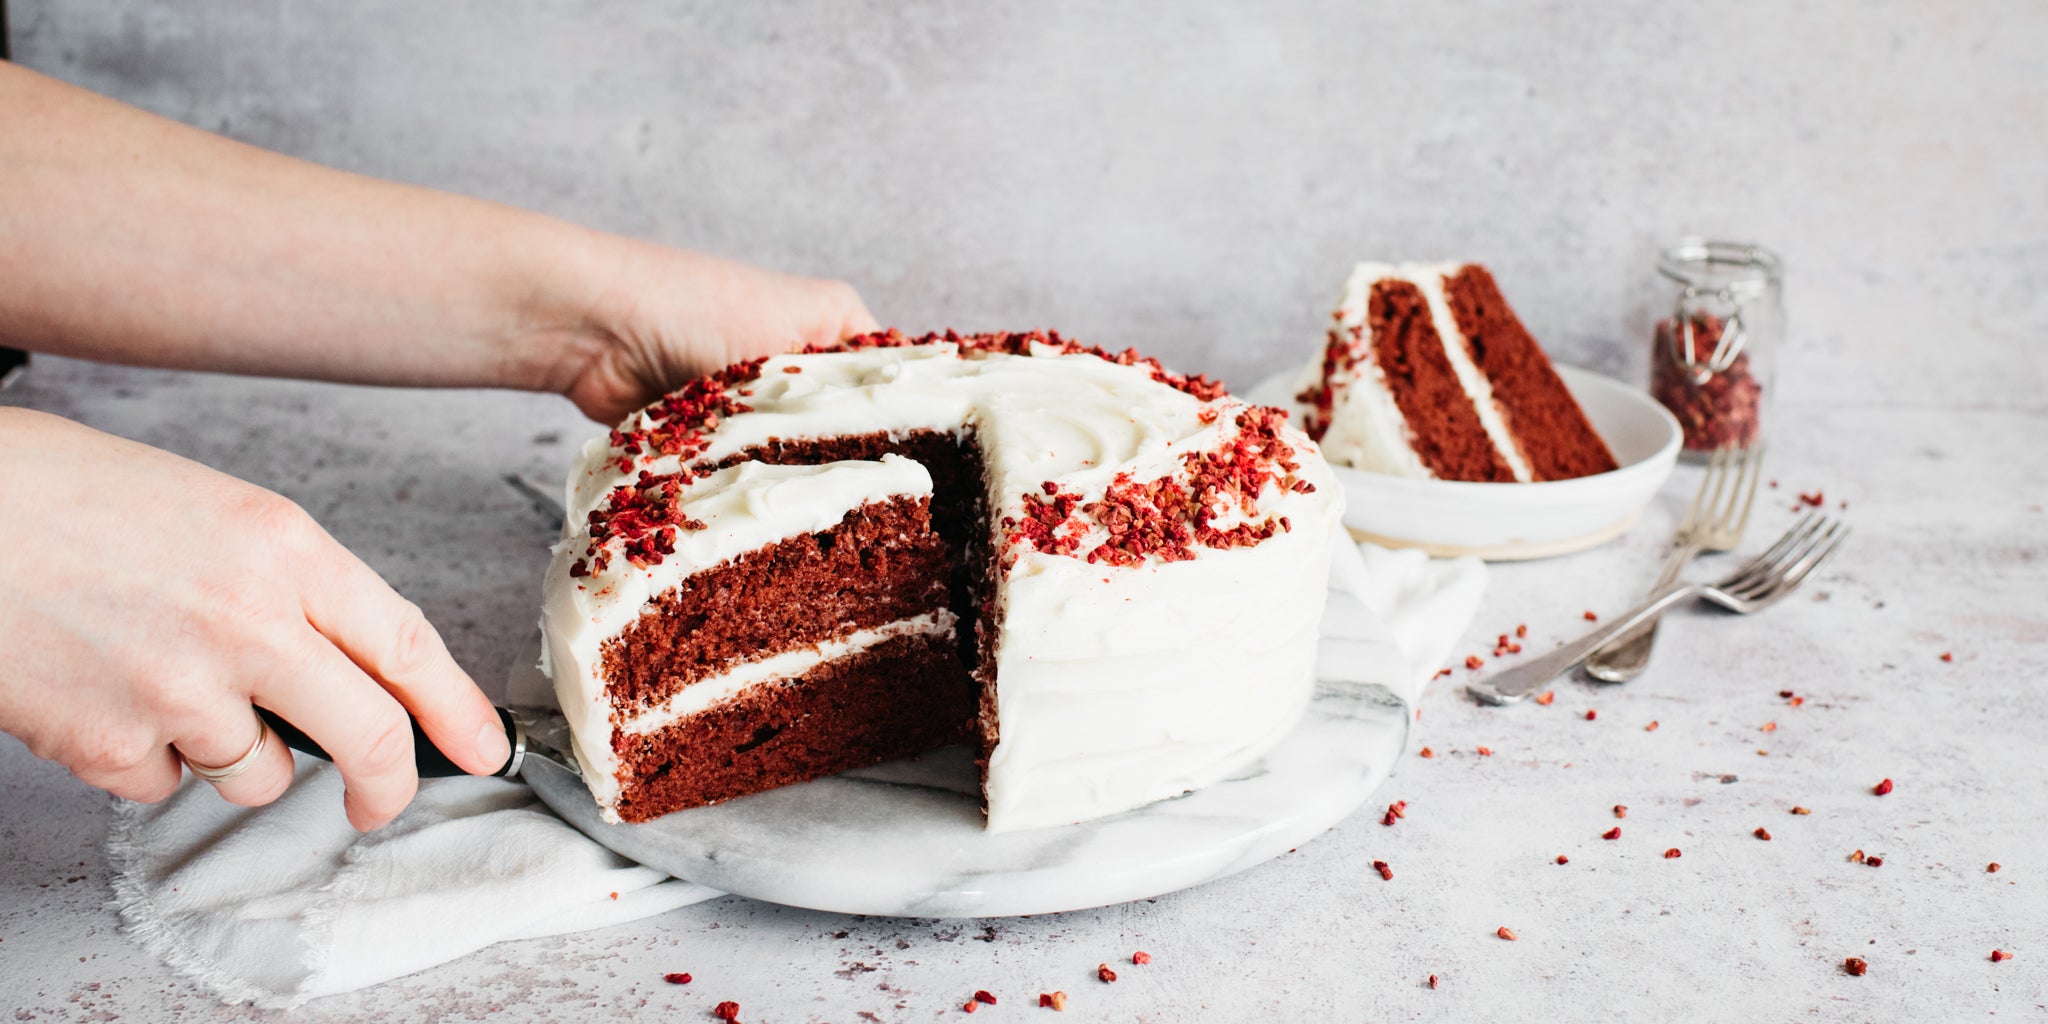 Cutting and serving a slice of red velvet cake made with cream cheese icing